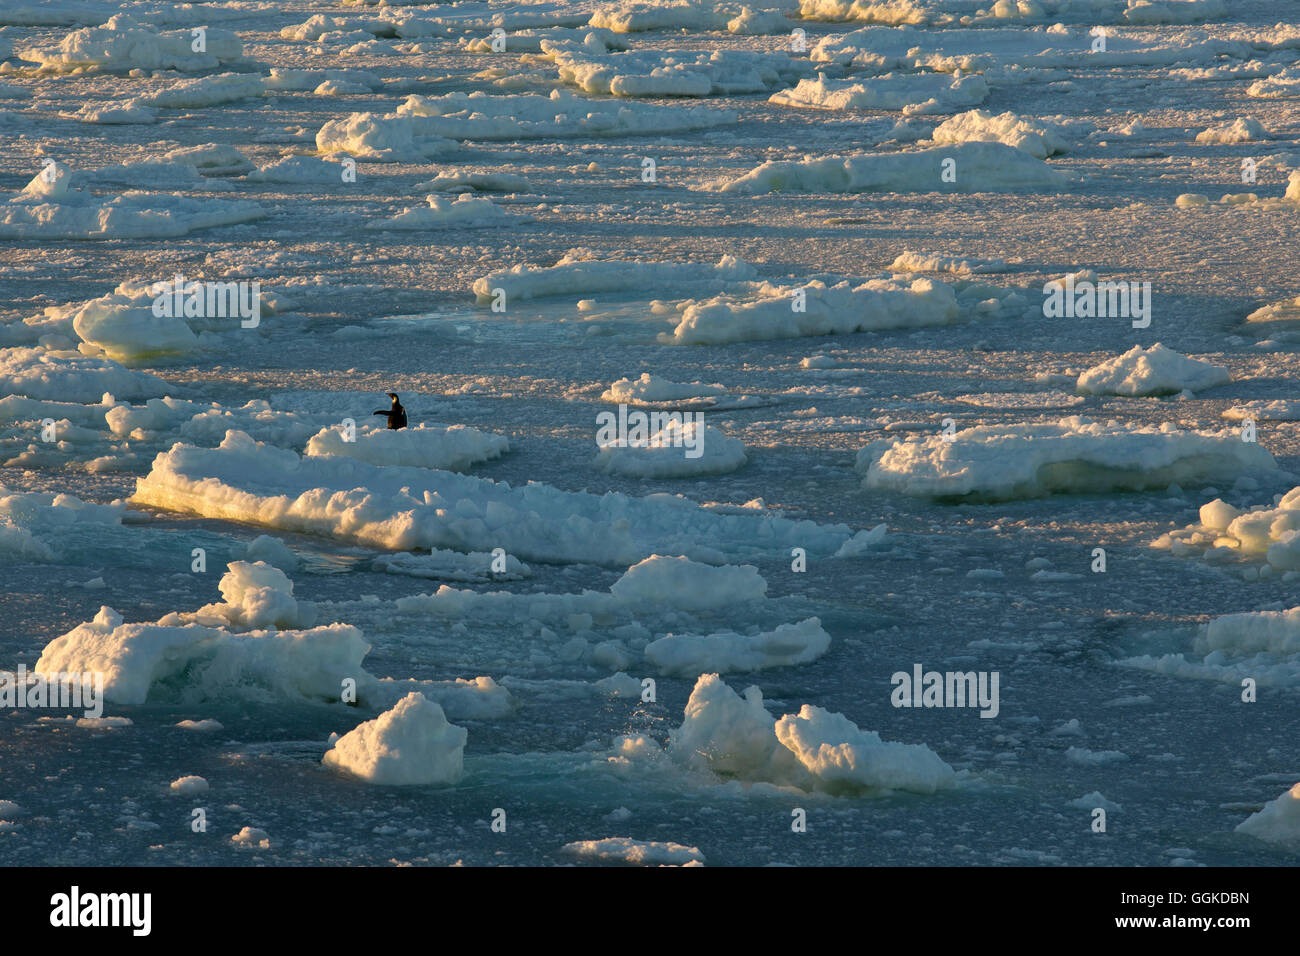 Ice floes floating in the water during sunset, a King Penguin (Aptenodytes patagonicus) showing the way, Terra Nova Bay, Antarct Stock Photo